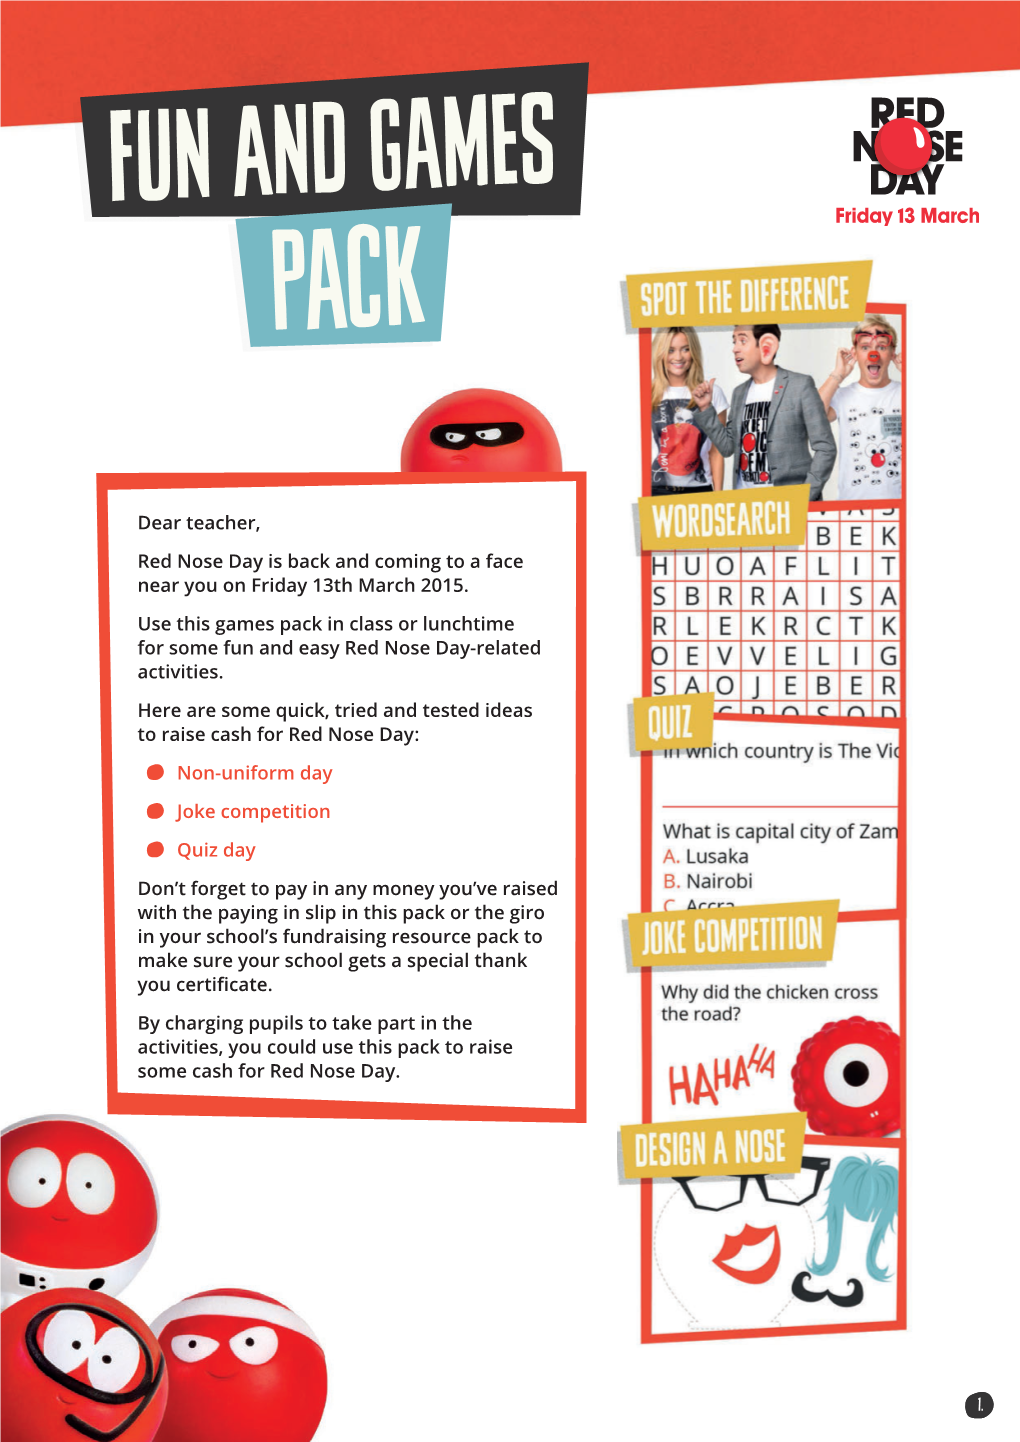 Dear Teacher, Red Nose Day Is Back and Coming